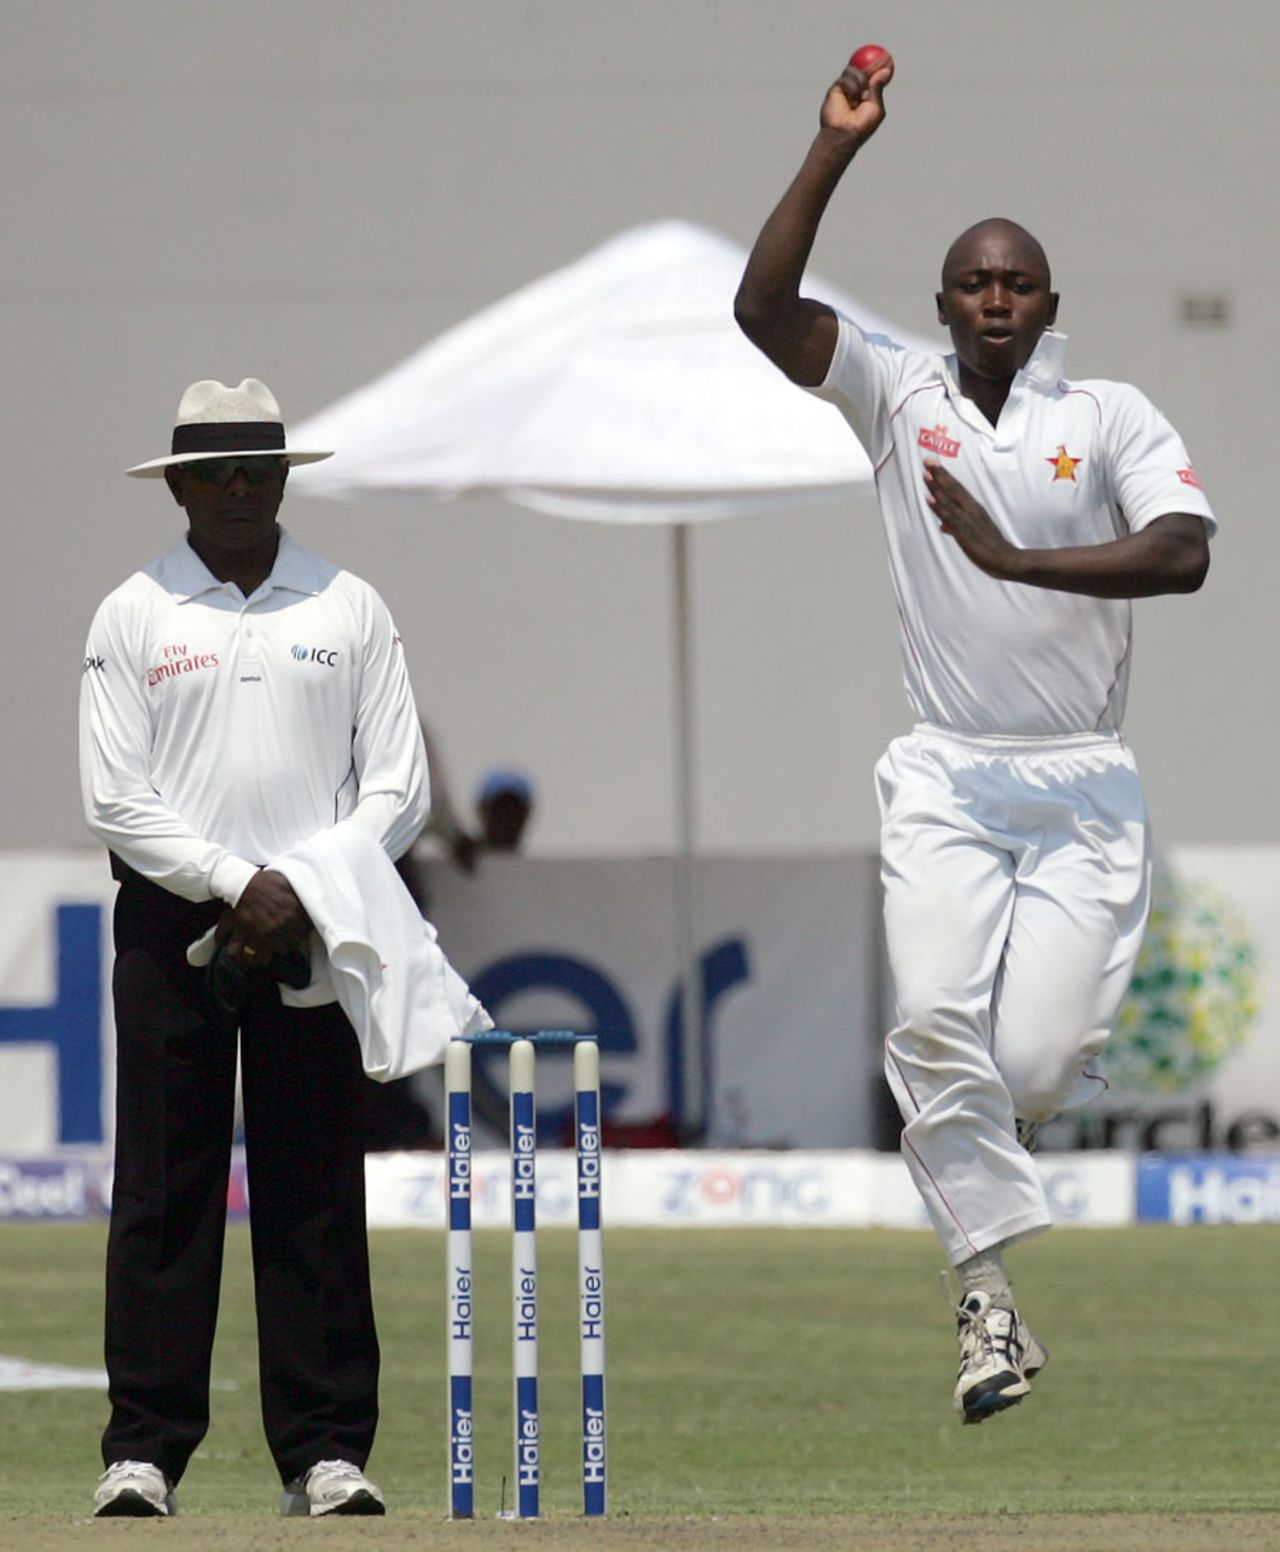 Tendai Chatara in his delivery stride, Zimbabwe v Pakistan, 1st Test, Harare, 1st day, September 3, 2013